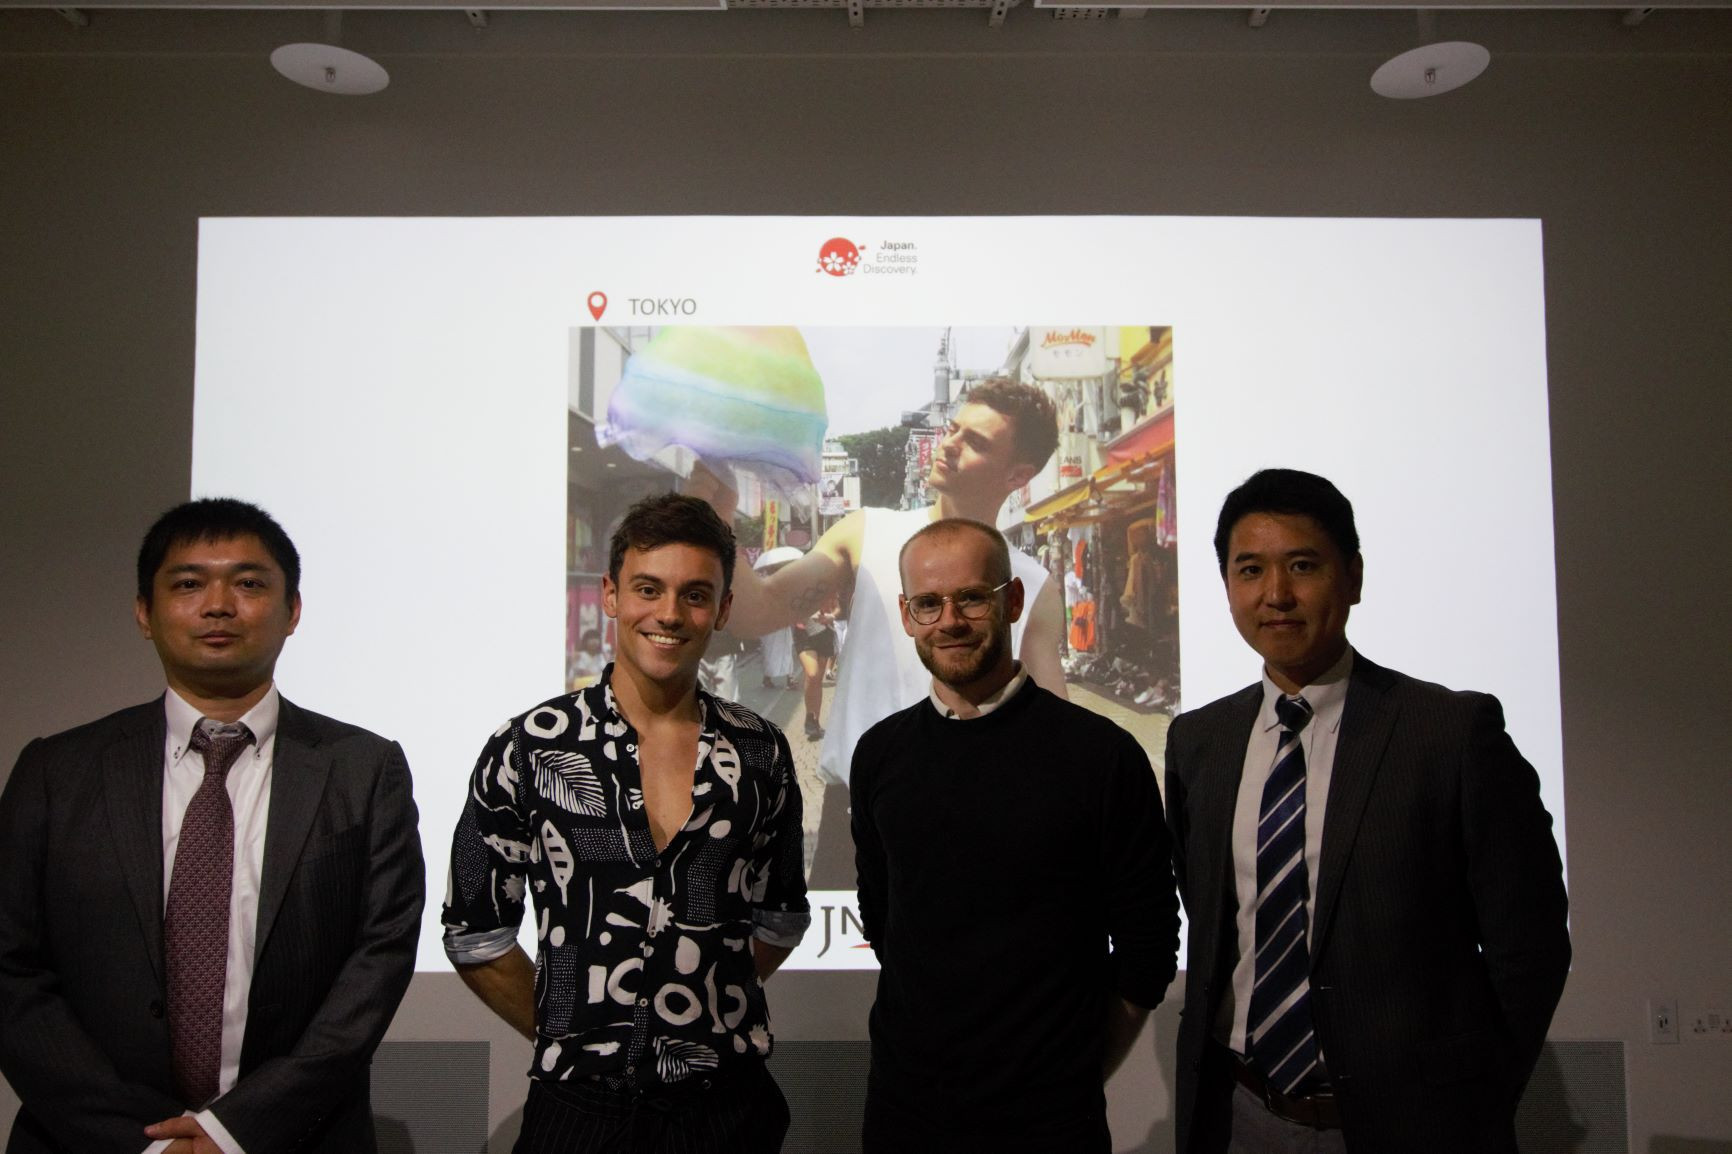 The collaboration with British diver Tom Daley to showcase Japanese culture was launched at Japan House ©JNTO